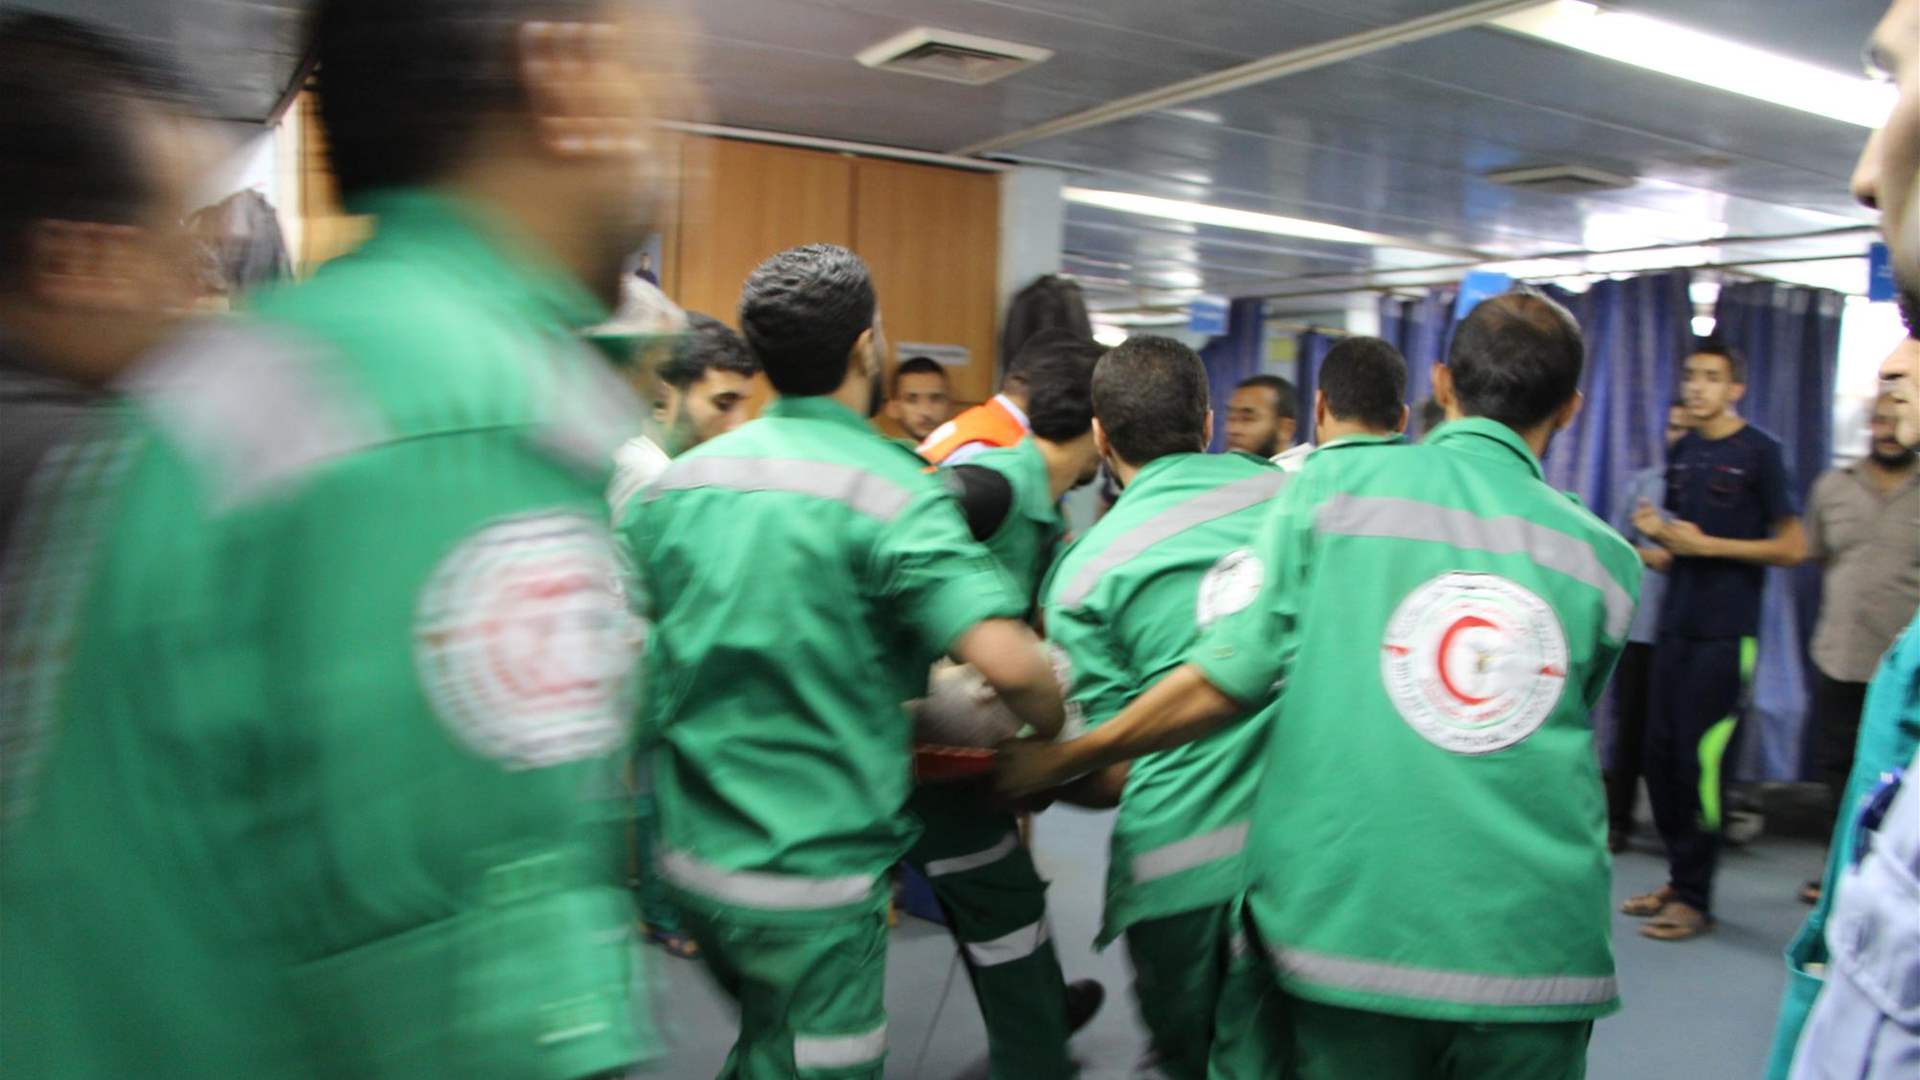 The Israeli army accuses Hamas of waging war from hospitals in Gaza